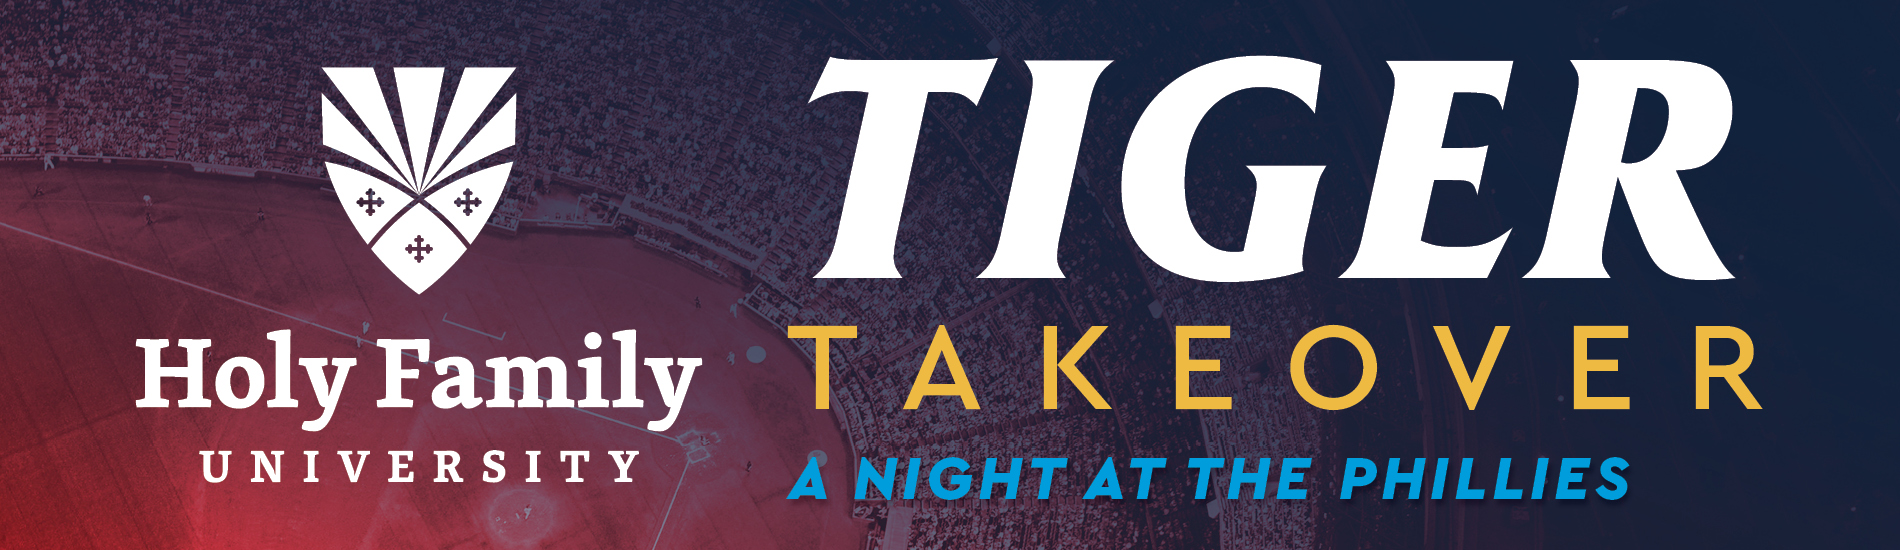 Holy Family University's Tiger Takeover: A Night at the Phillies Game